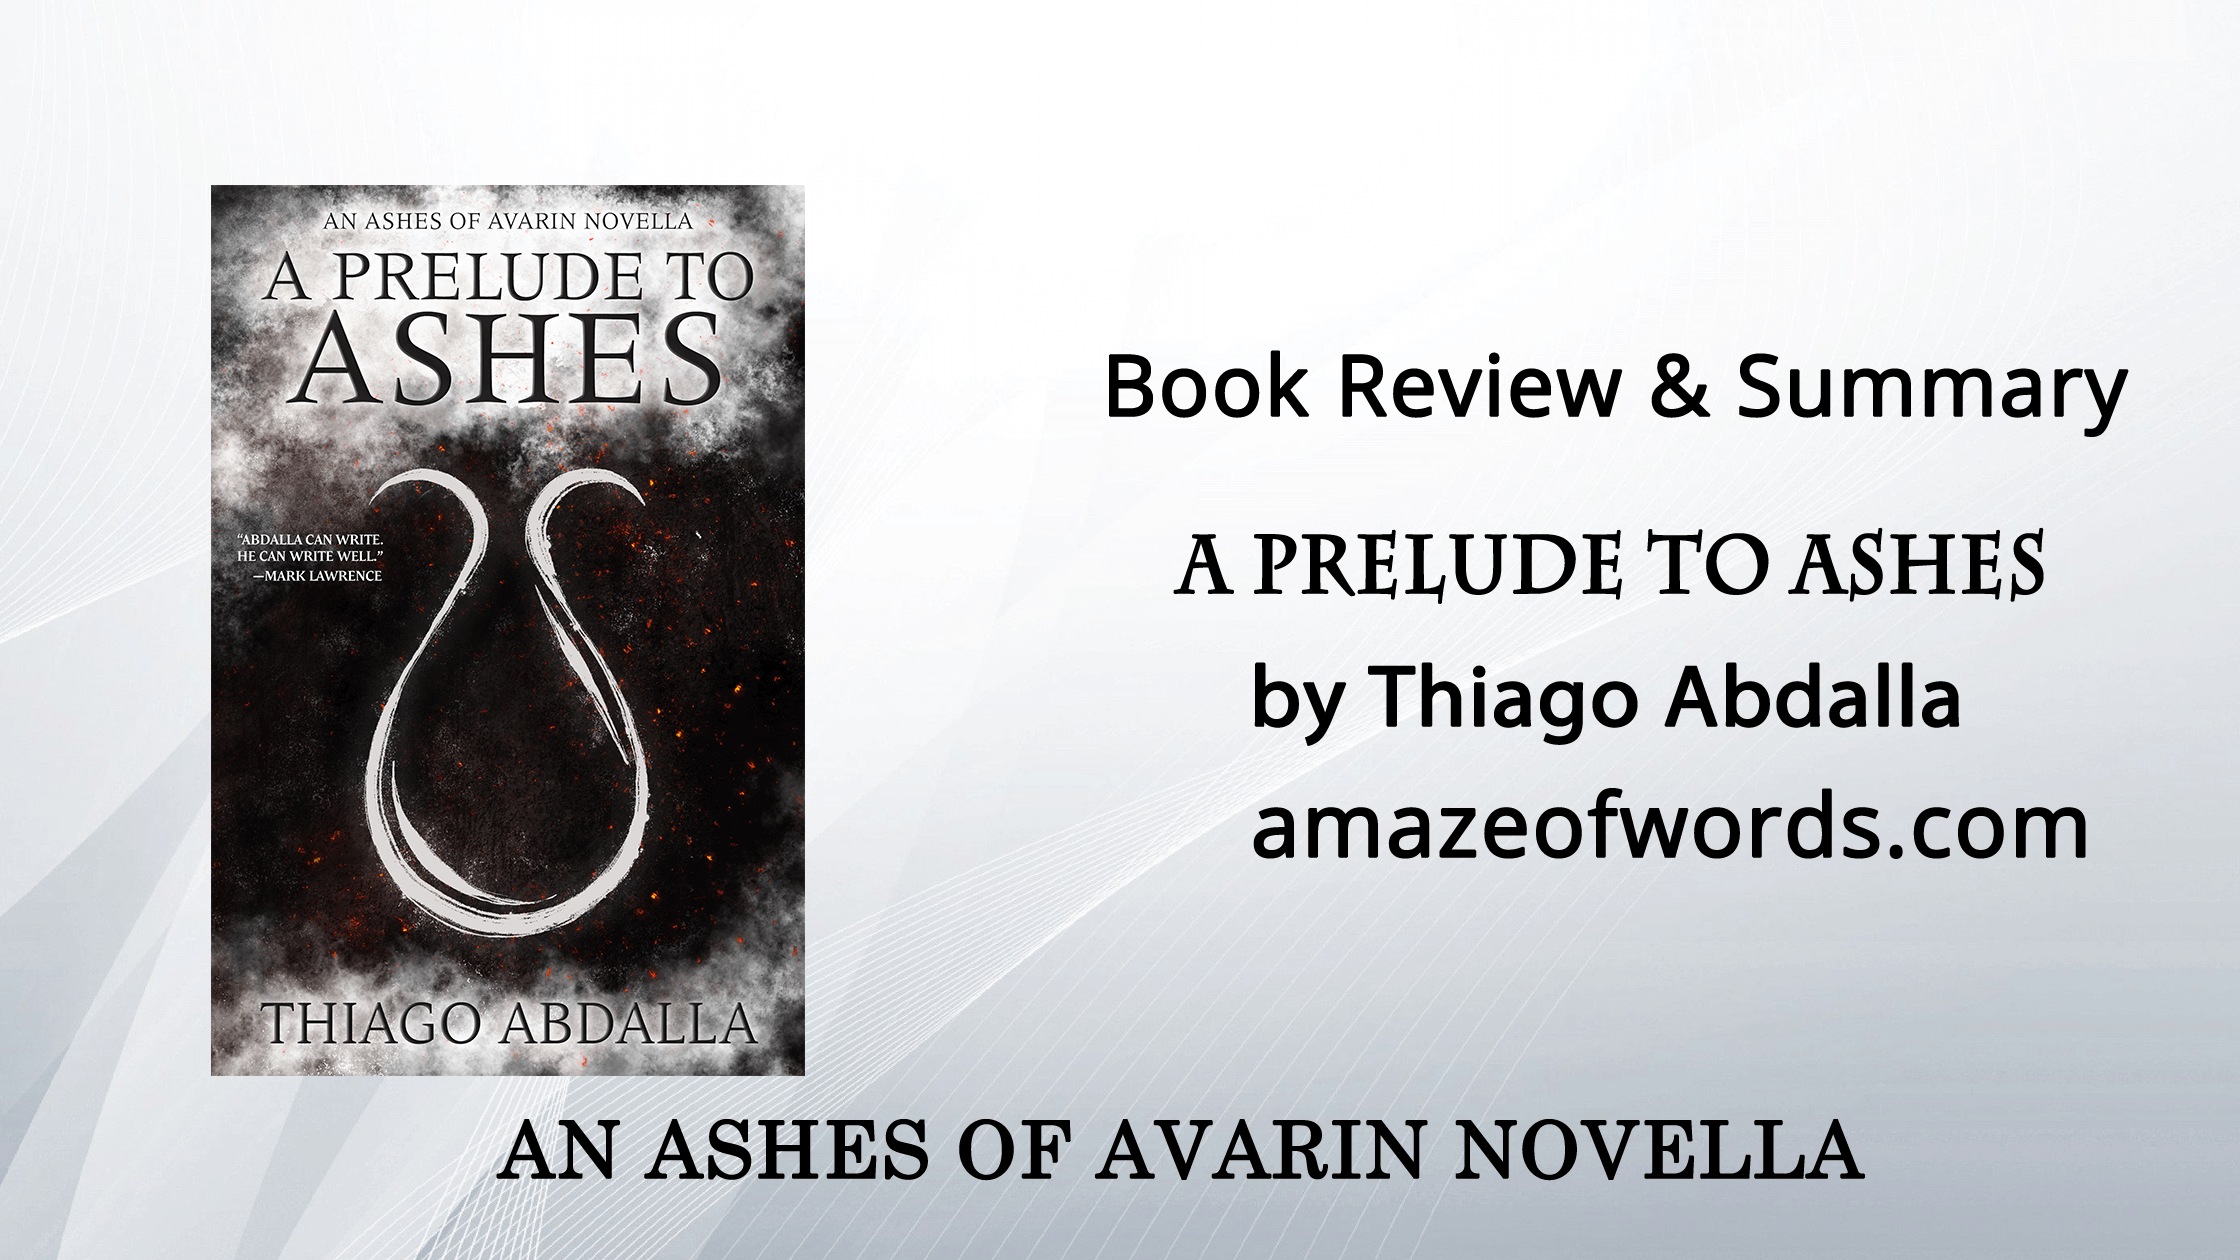 A Prelude to Ashes by Thiago Abdalla — Book Review & Summary